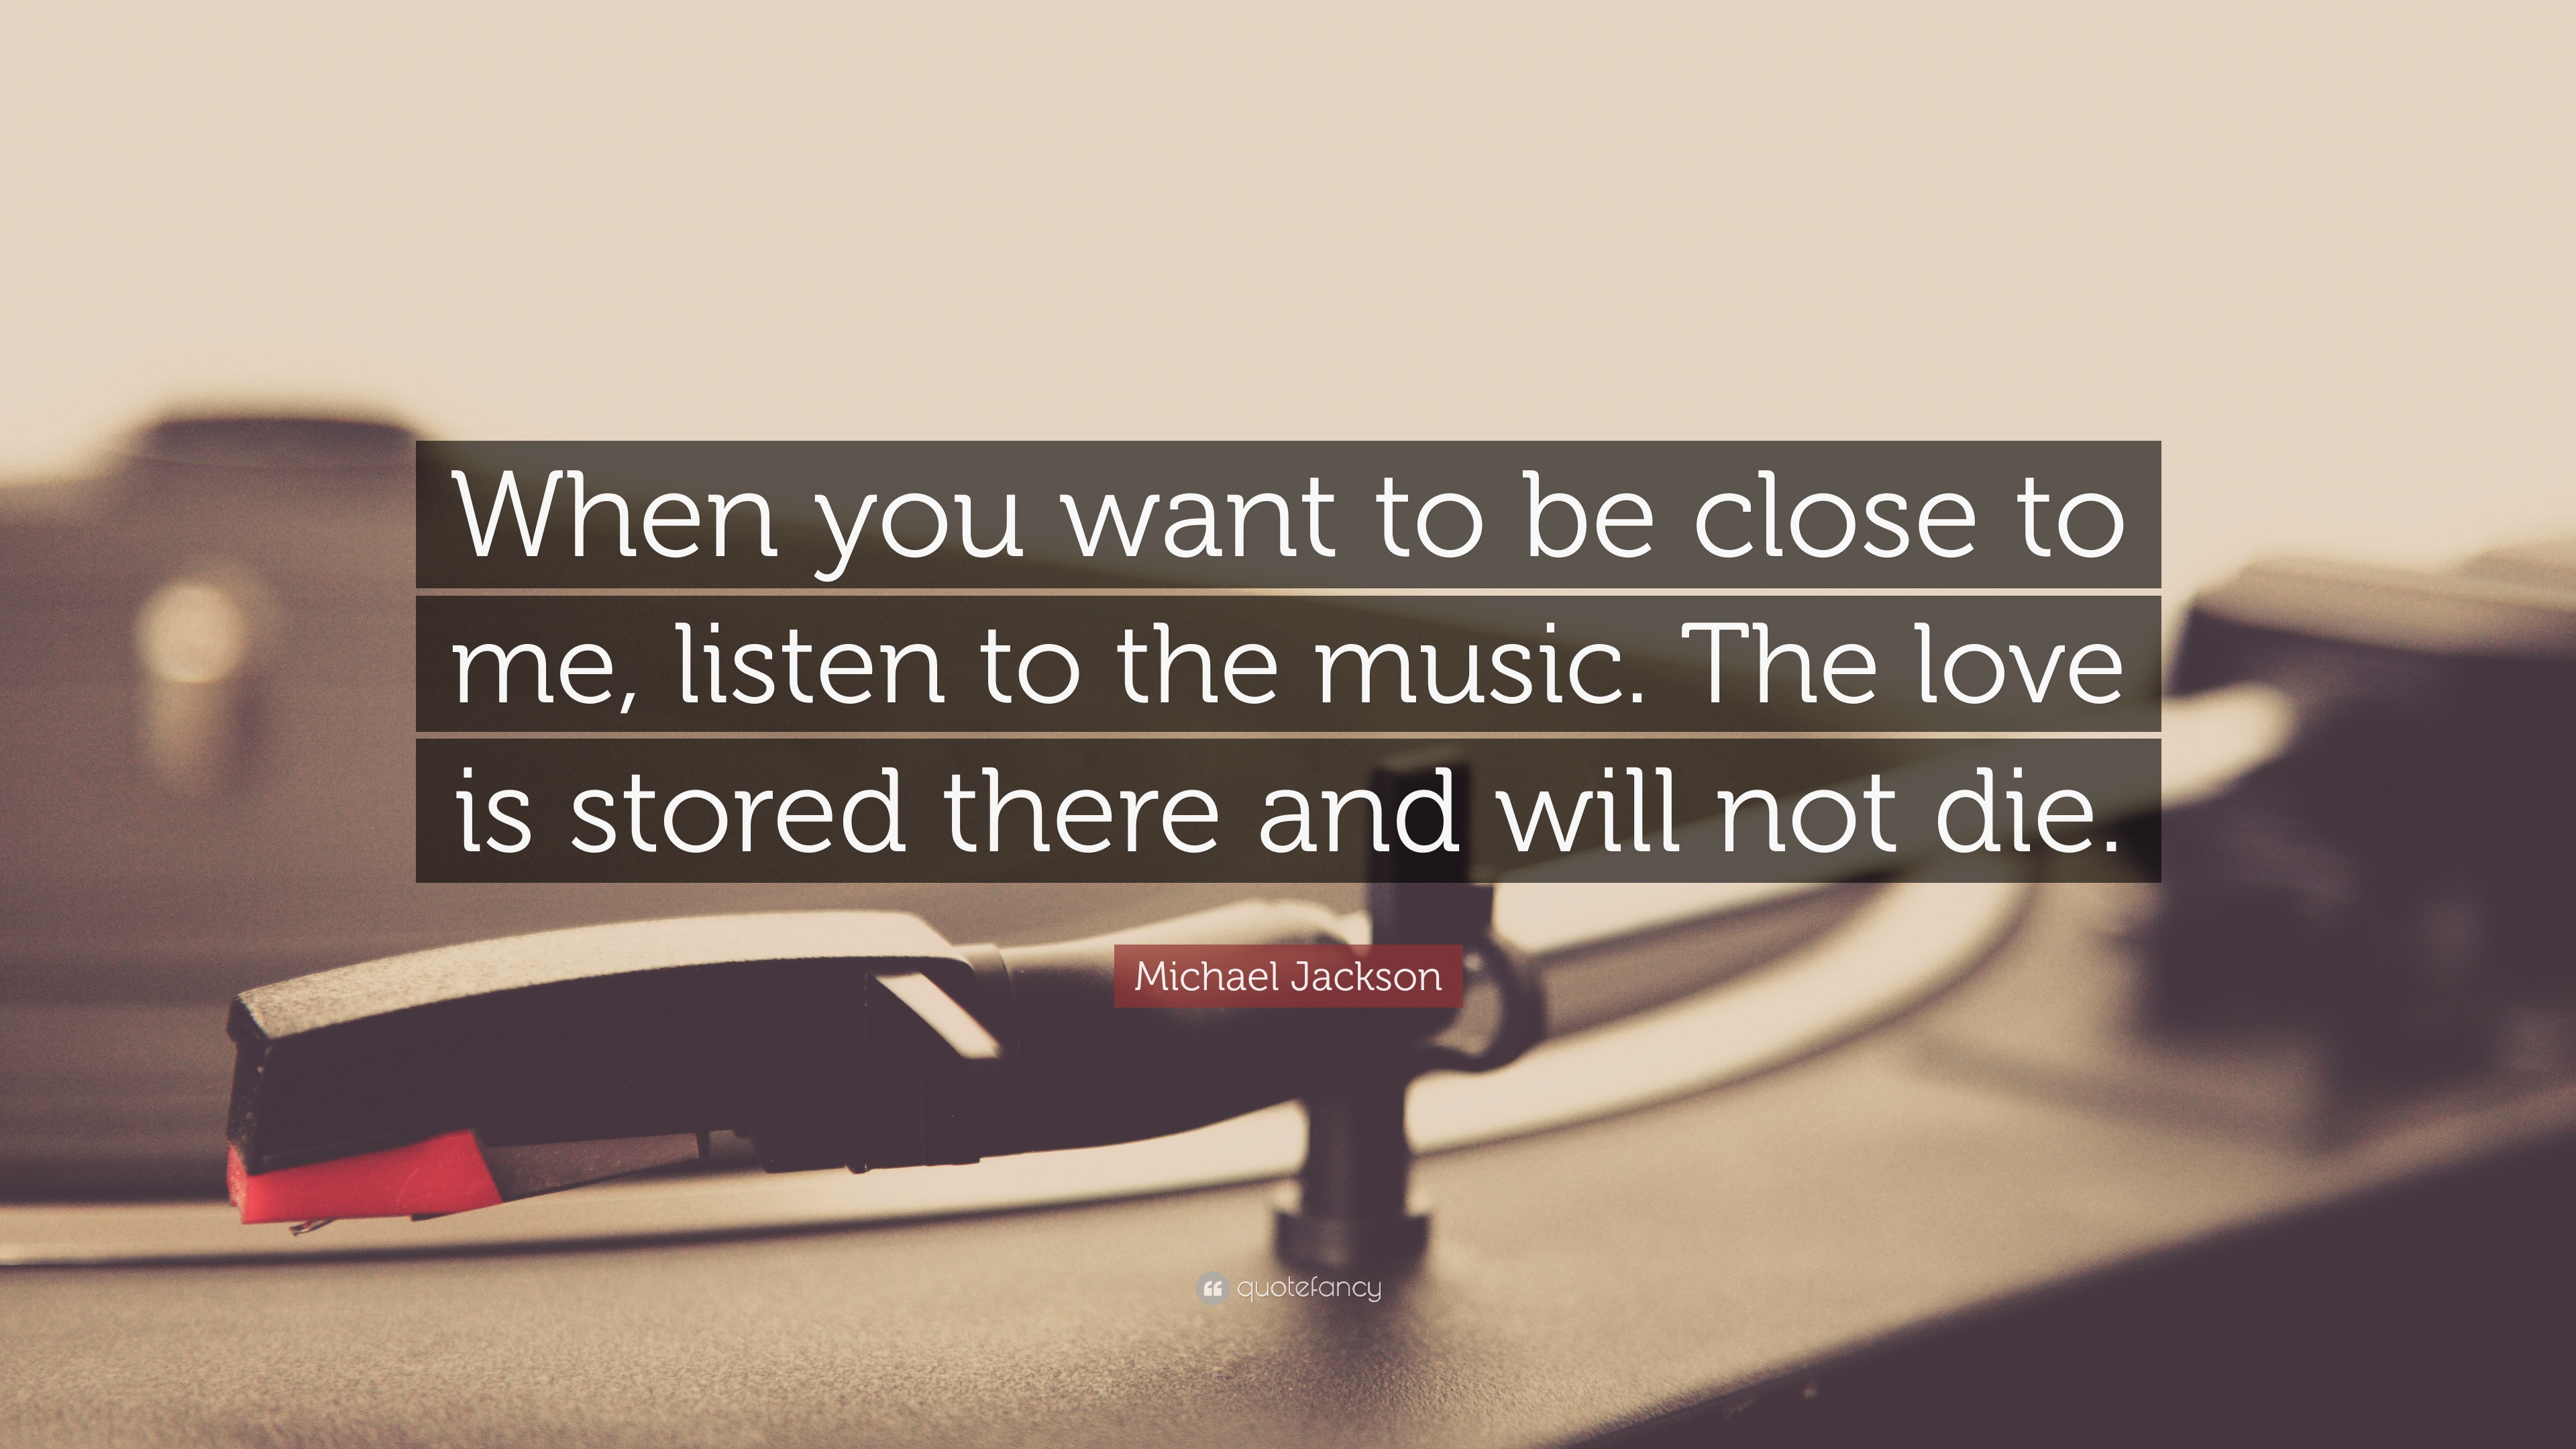 Michael Jackson Quote: “When you want to be close to me, listen to